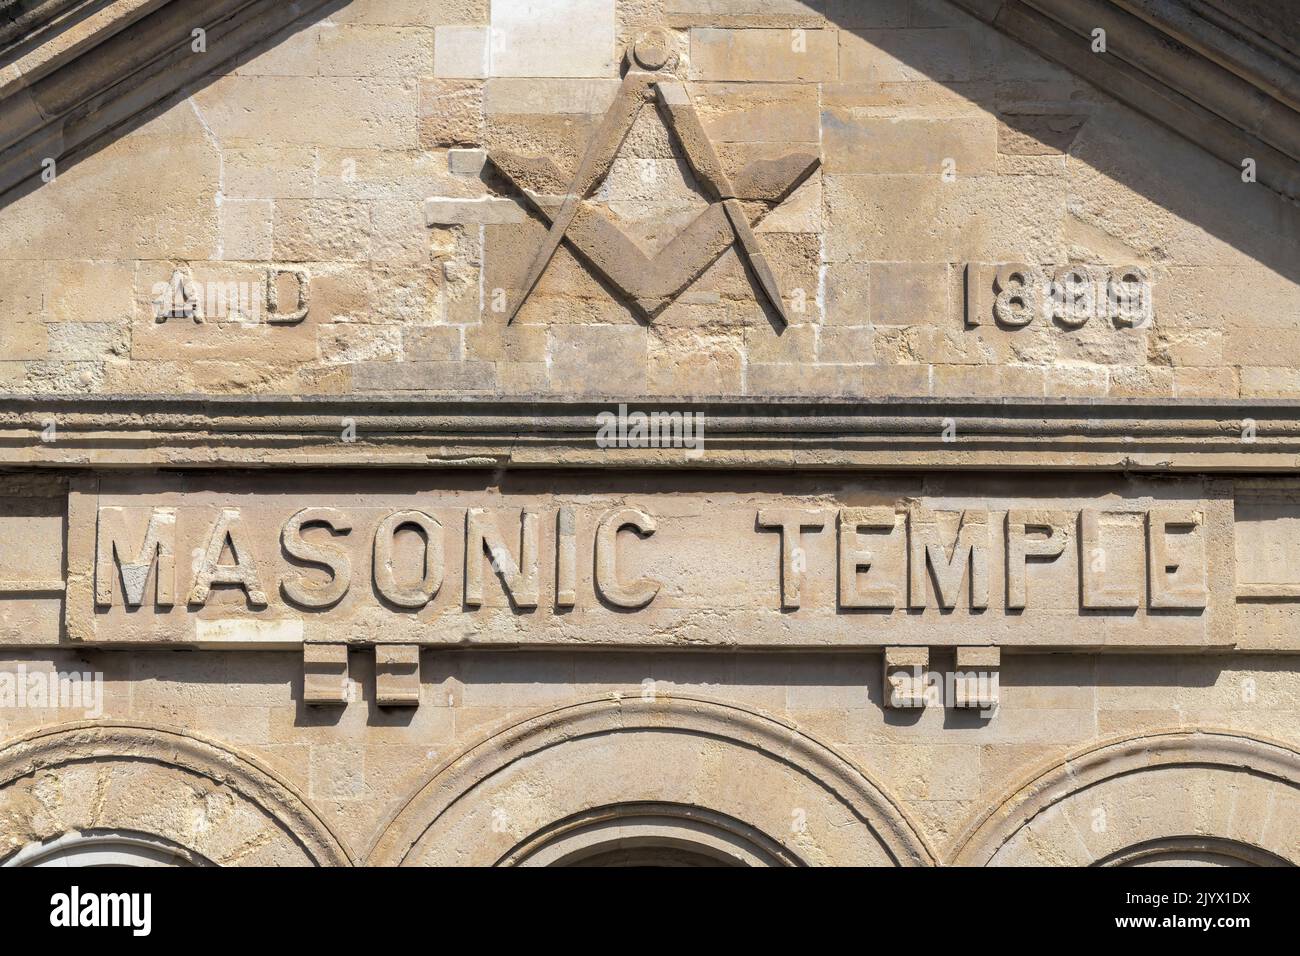 The weathered front fascia of the Masonic Temple in Ilfracombe, North Devon, England. Stock Photo